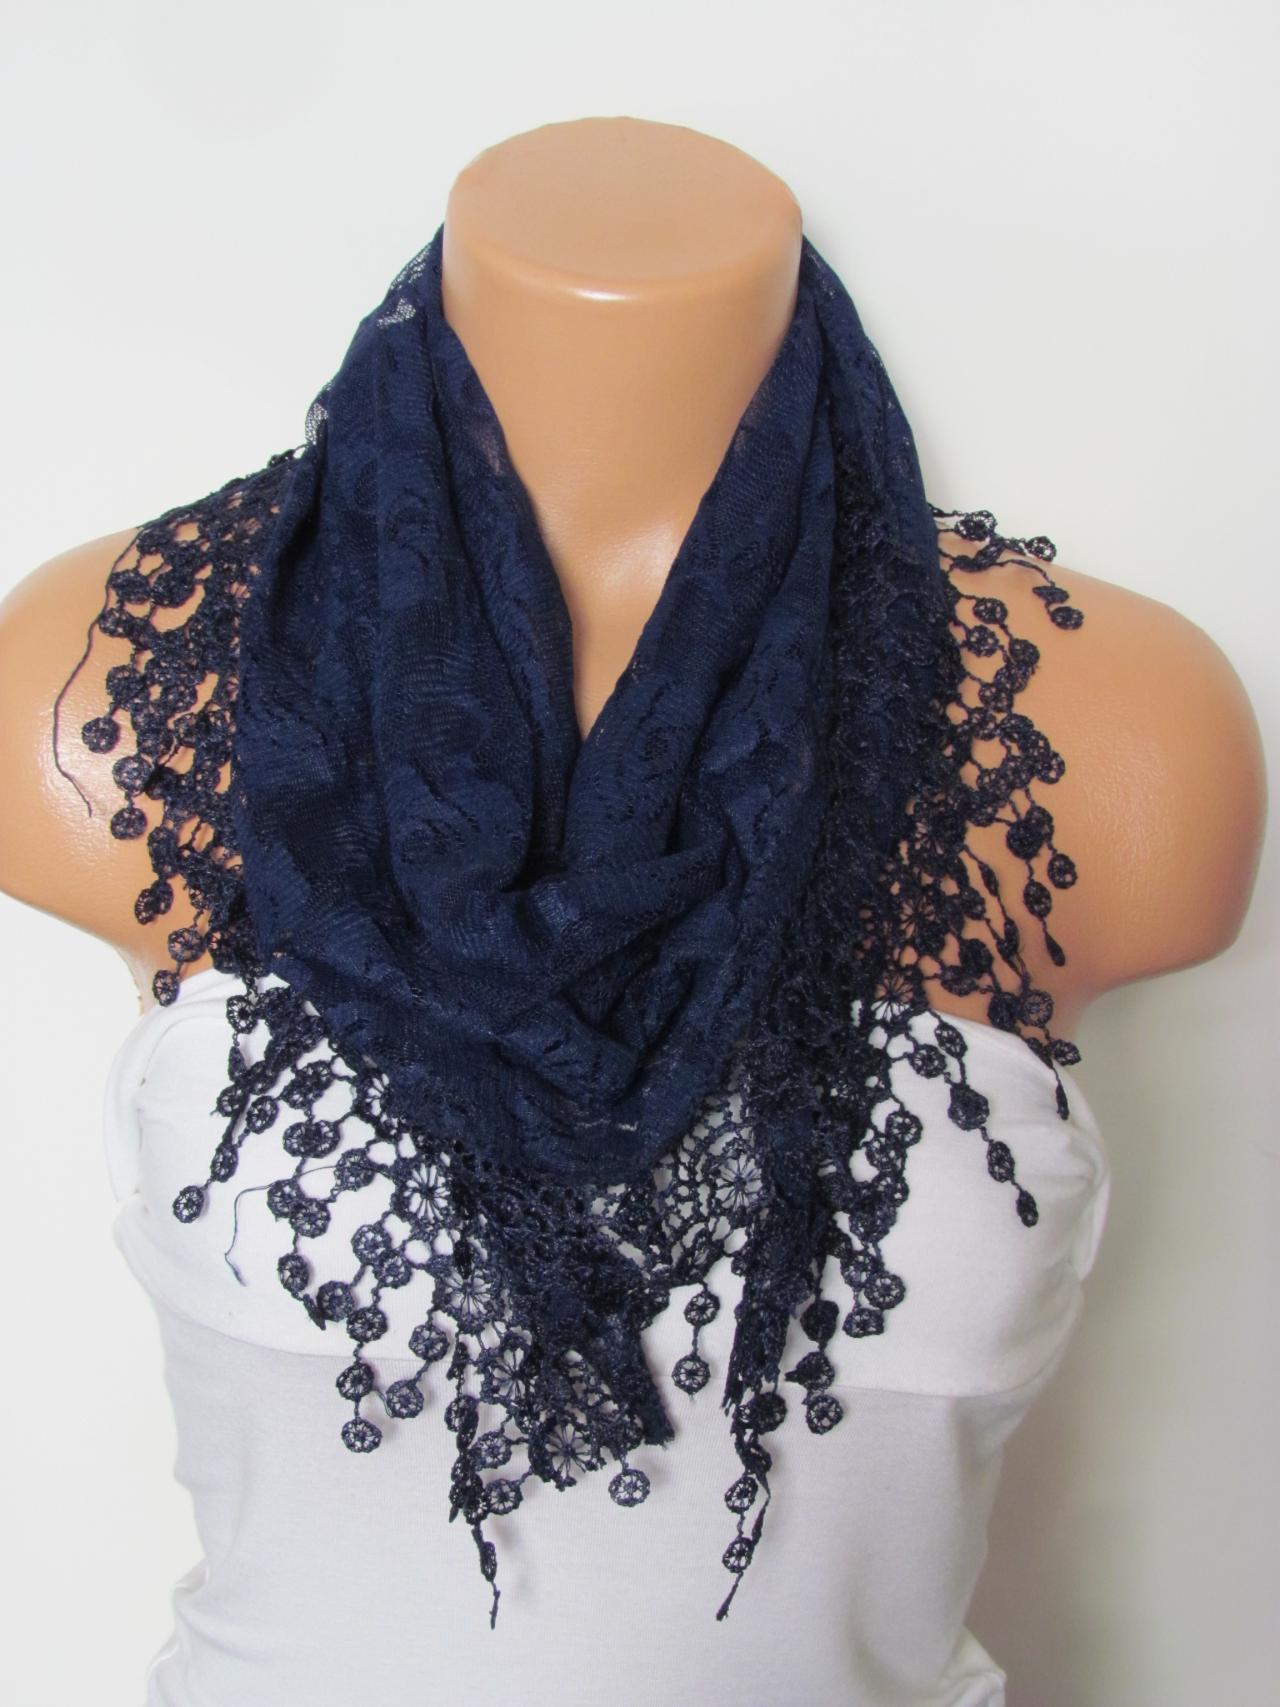 Dark Blue Long Scarf With Fringe-Winter Fashion Scarf-Headband-Necklace- Infinity Scarf- Winter Accessory-Long Scarf